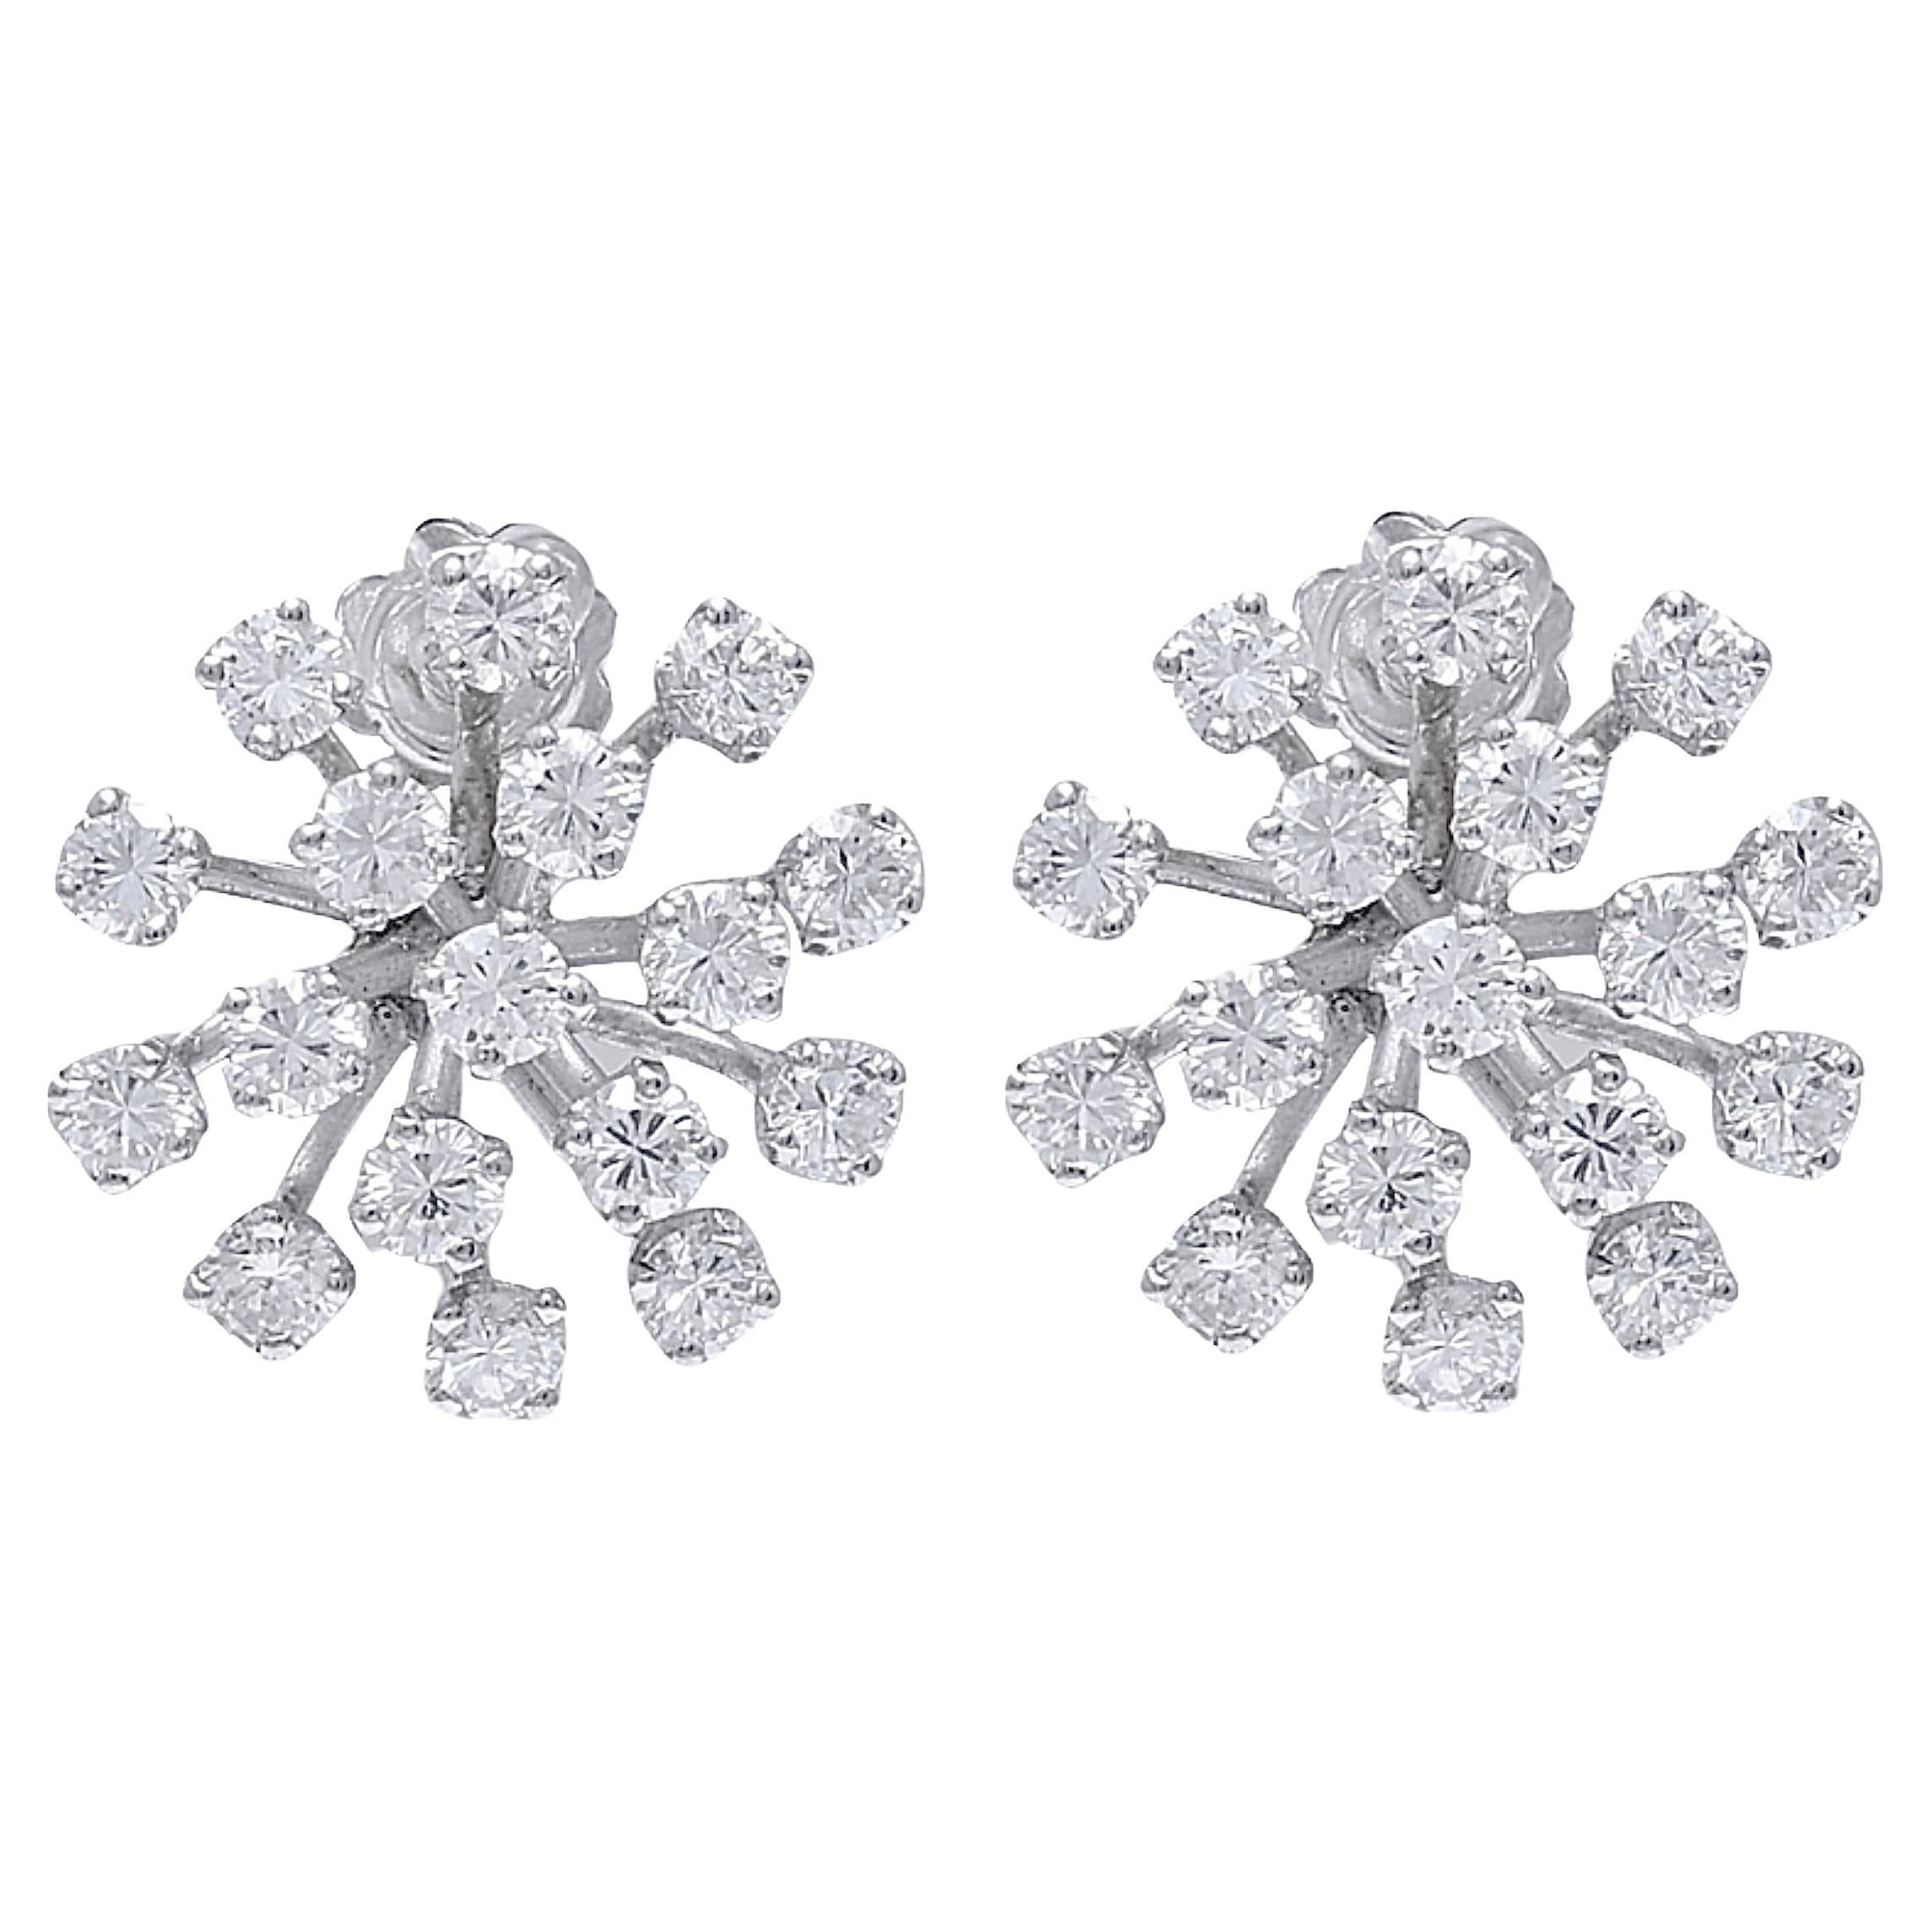 18 Karat White Gold Clip-On Earrings with 34 Brilliant Cut Diamonds Top Quality For Sale